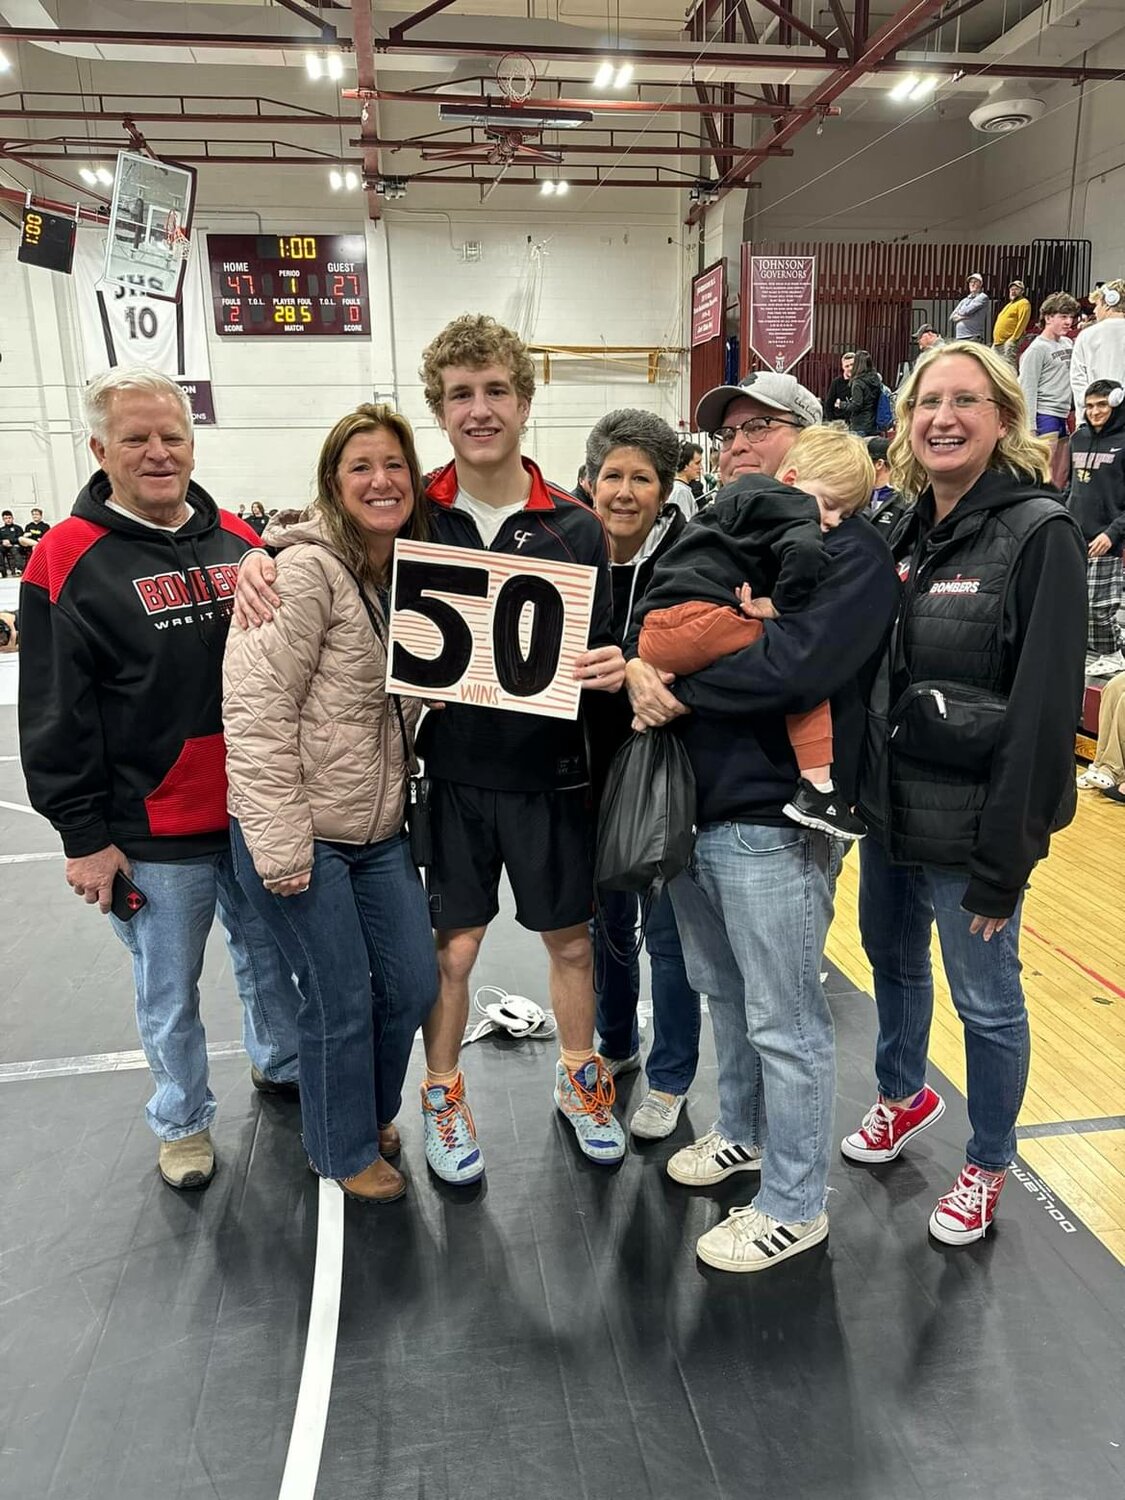 Lucas Freeberg earned his 50 th win for the Cannon Falls-Randolph Wrestling team